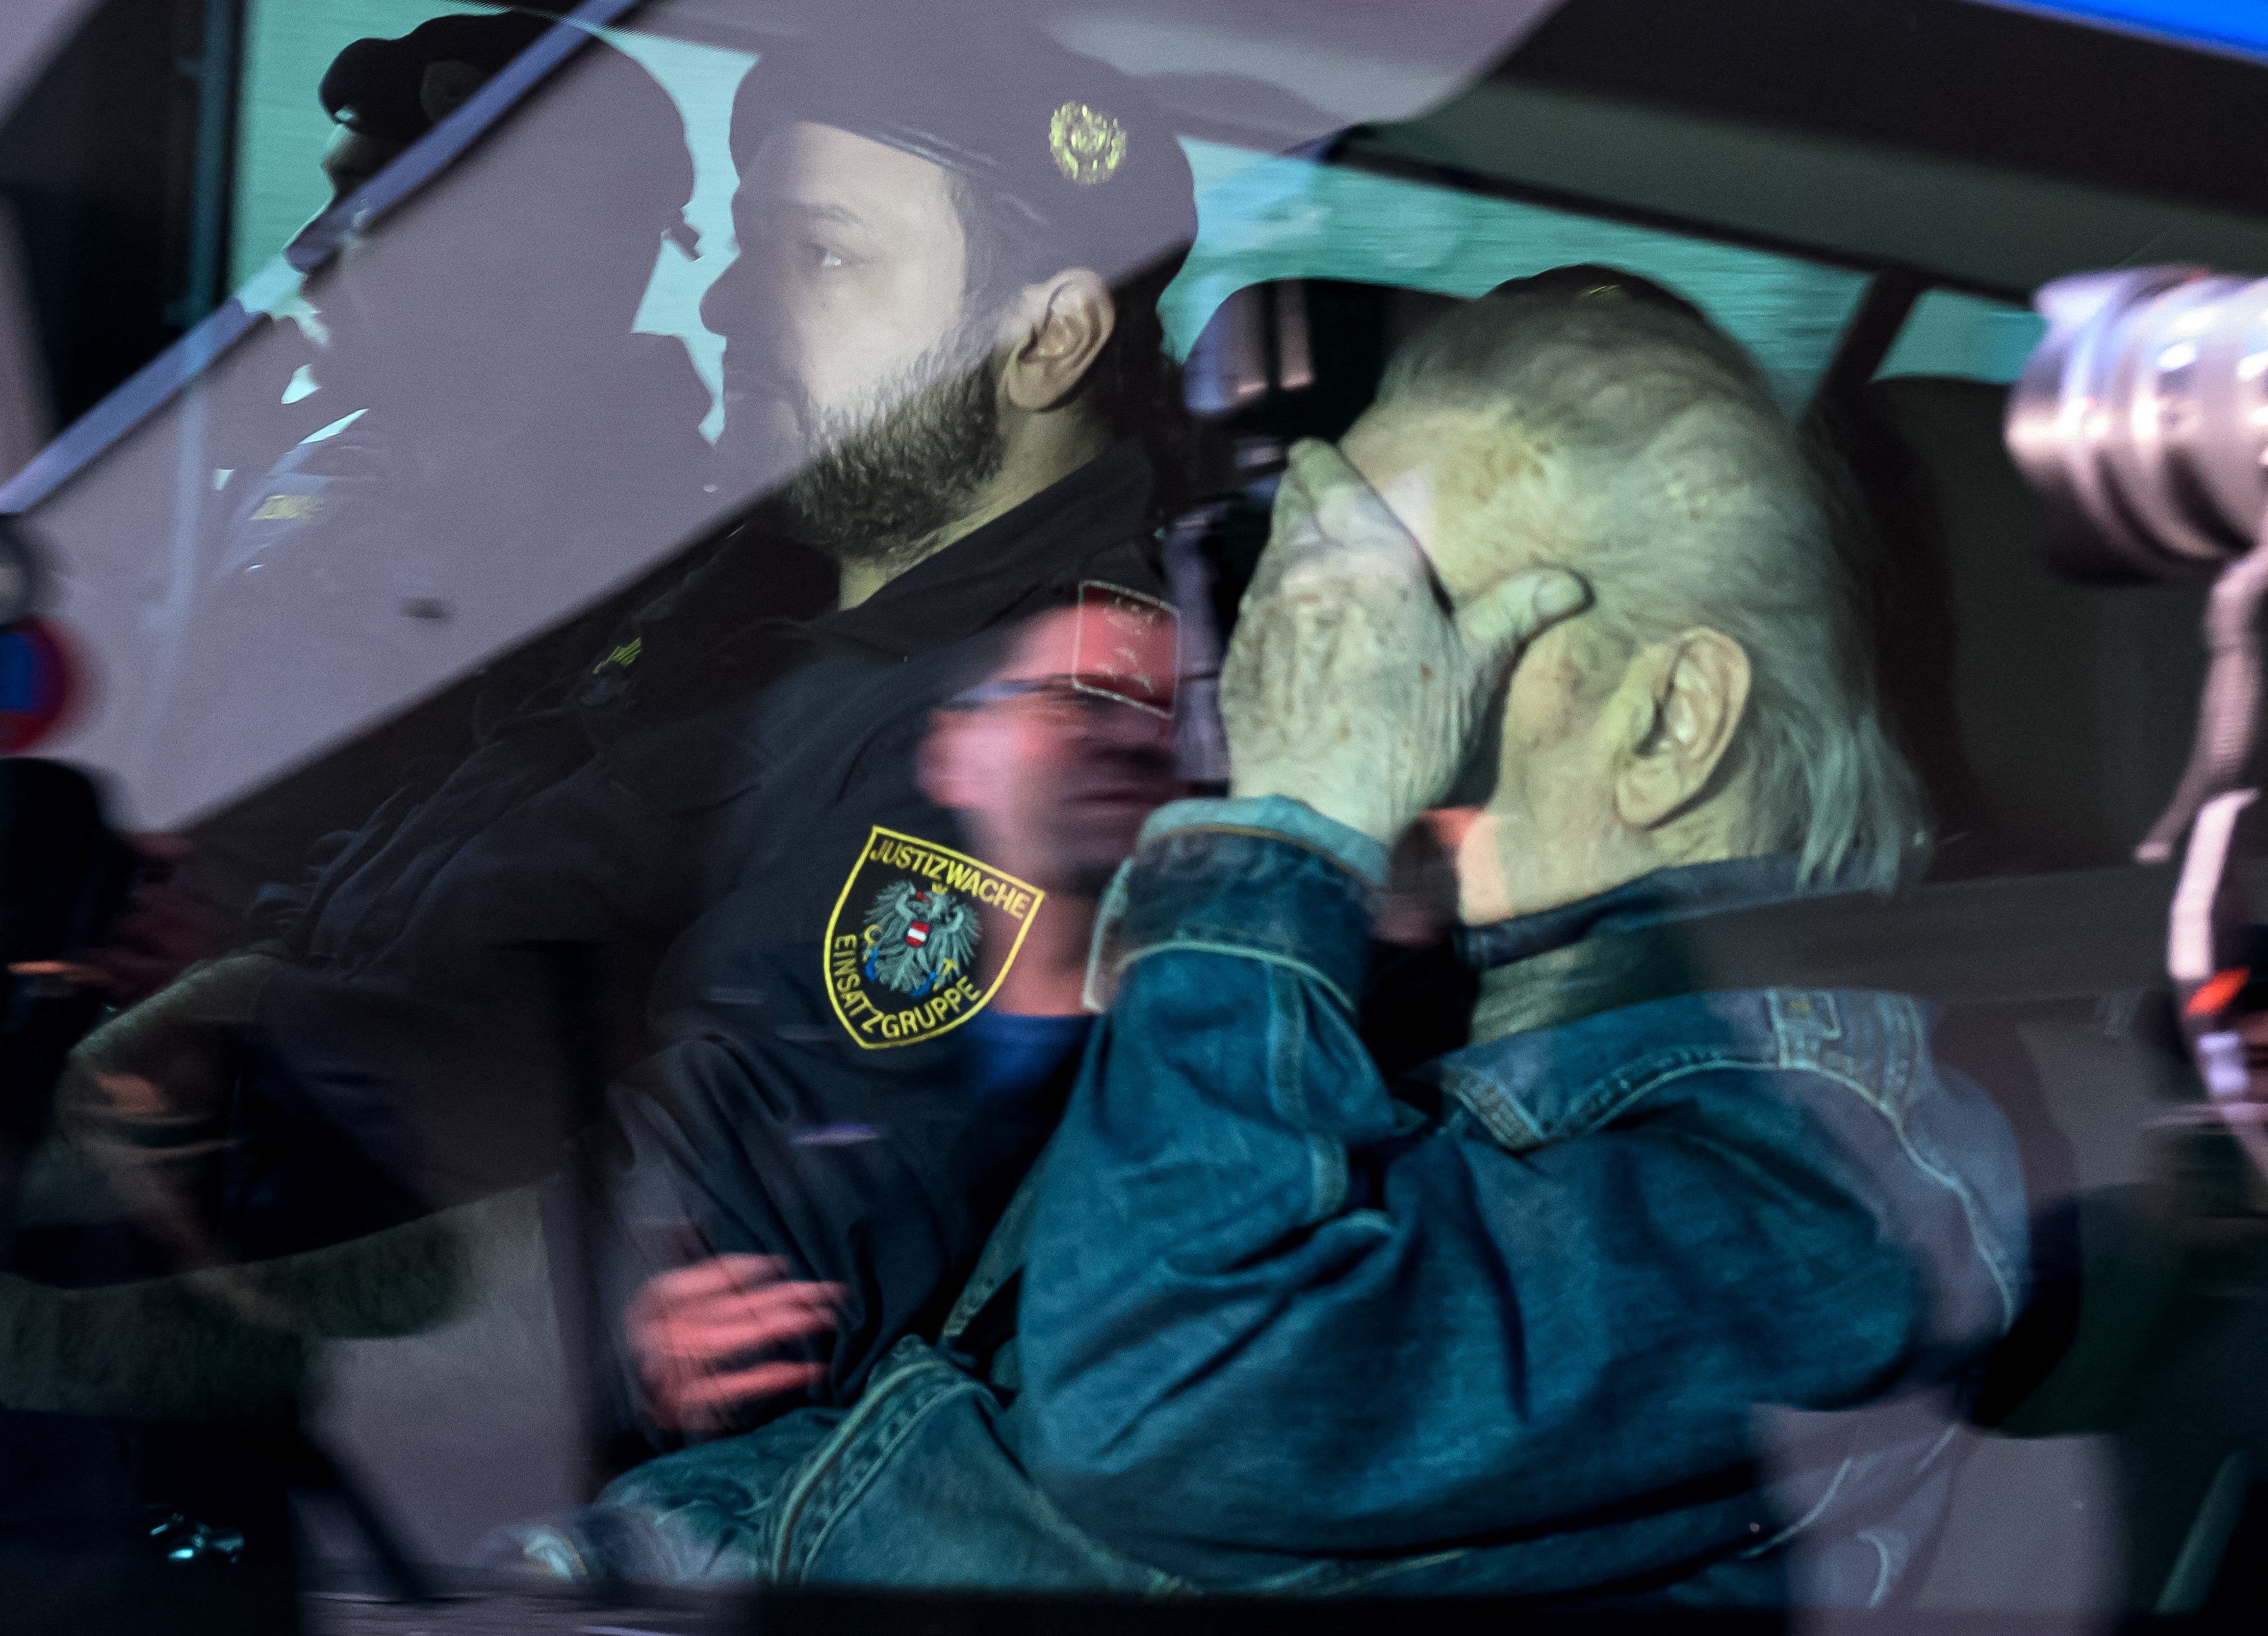 Austrian Josef Fritzl, who imprisoned his daughter in a cellar for over 24 years and fathered seven children with her, is escorted back to a prison